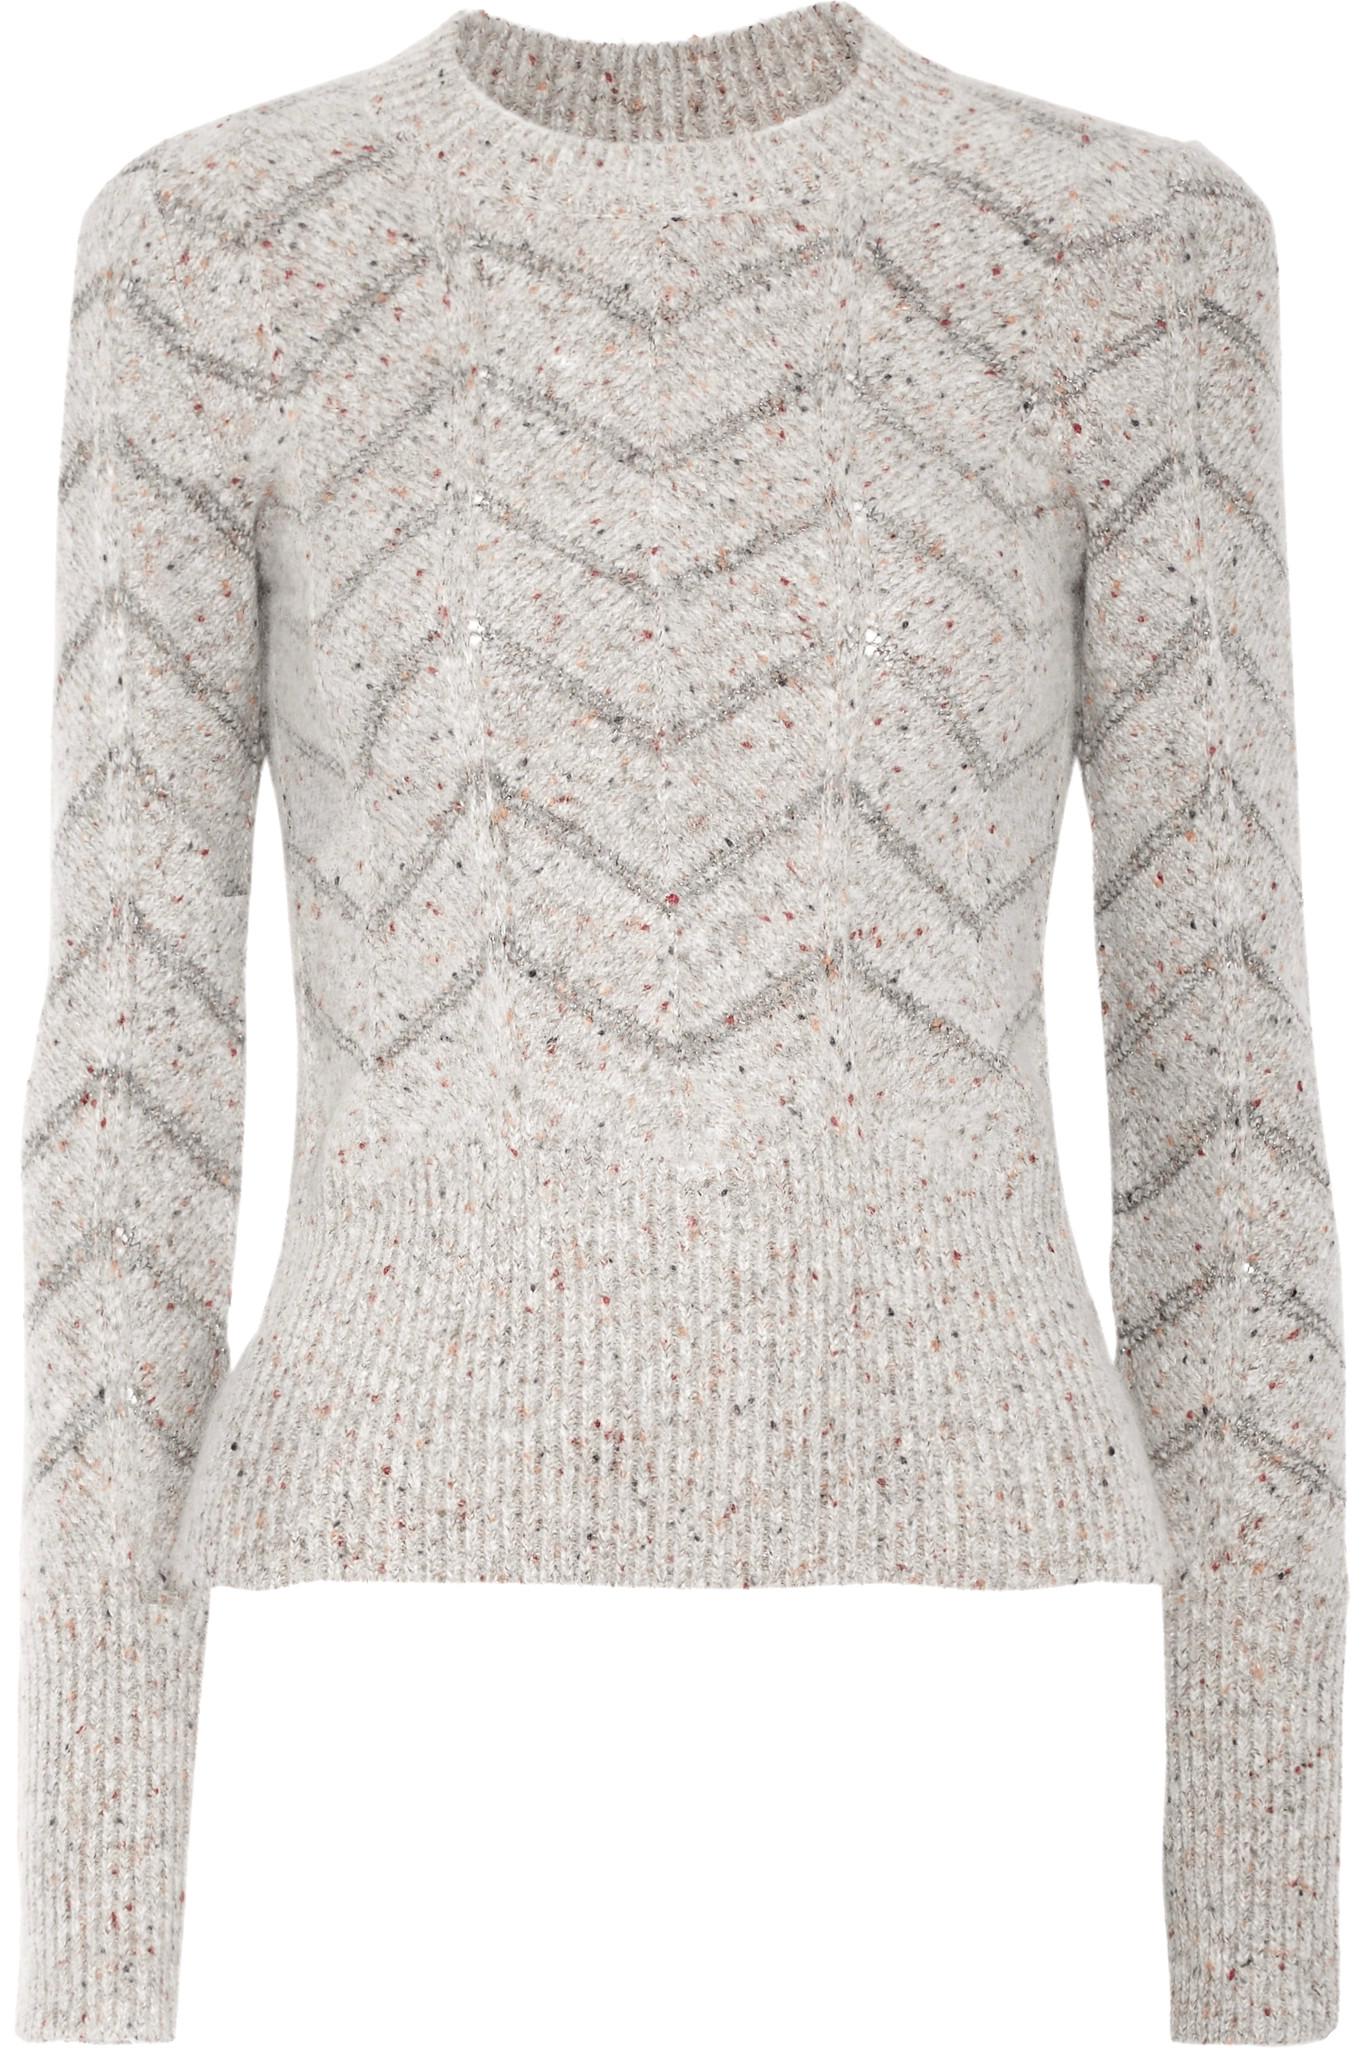 Lyst - Isabel Marant Elson Mélange Knitted Sweater in Gray